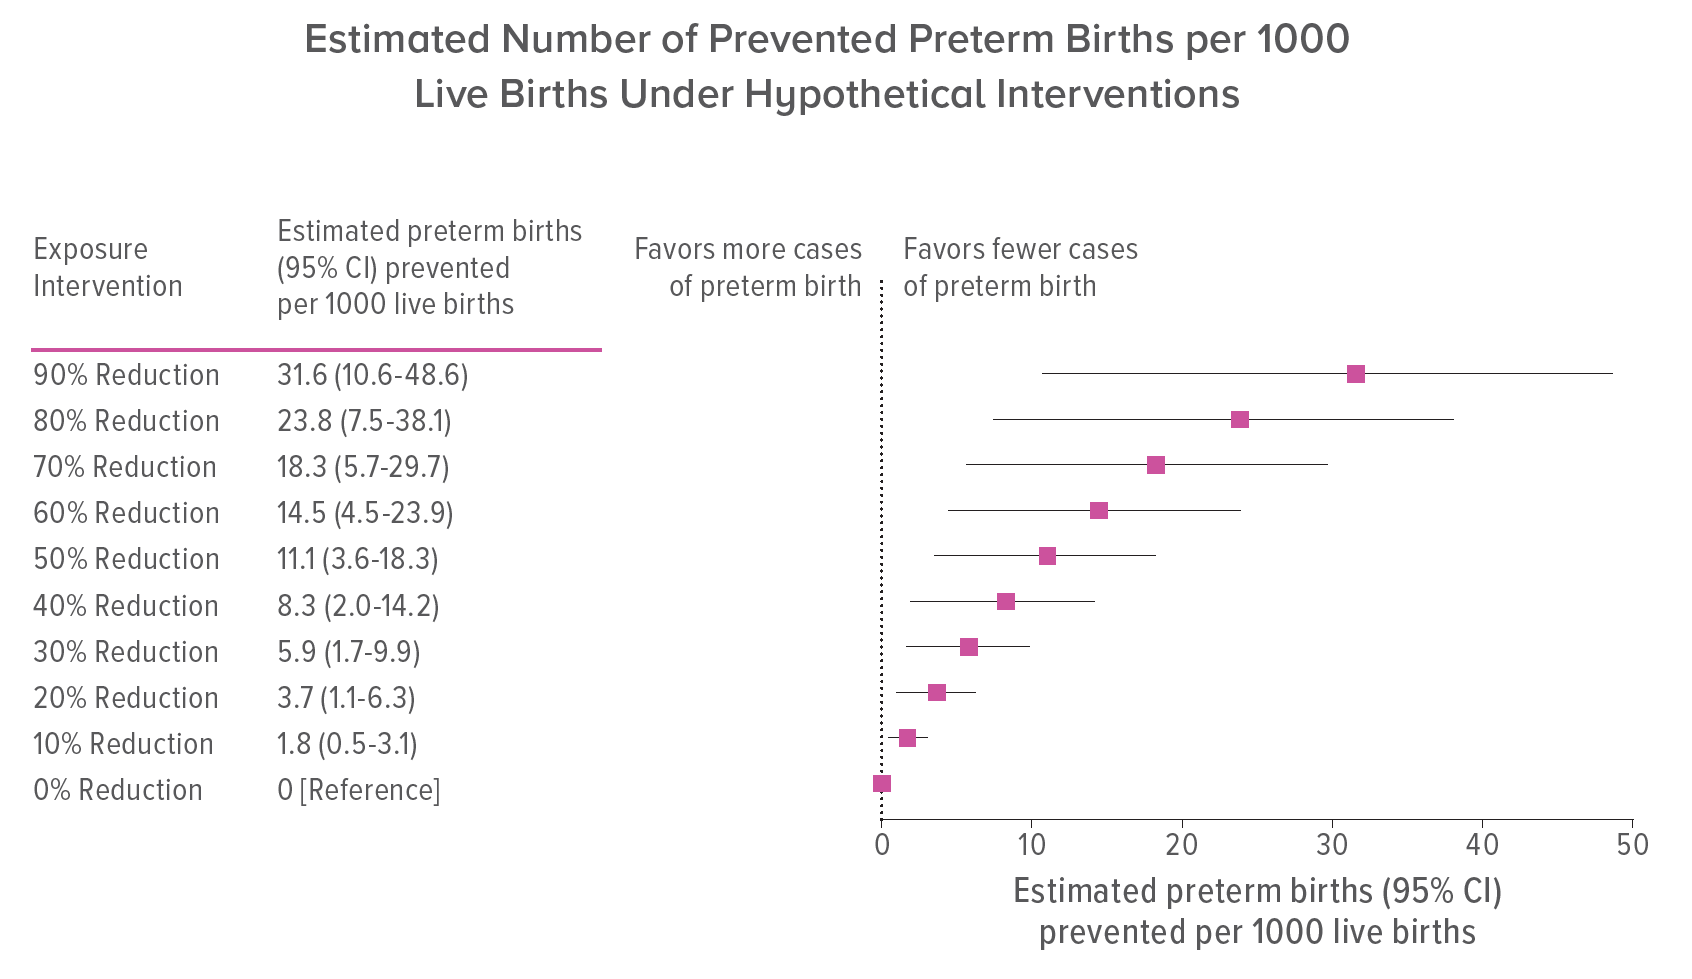 Estimated Number of Prevented Preterm Births per 1000 Live Births Under Hypothetical Interventions